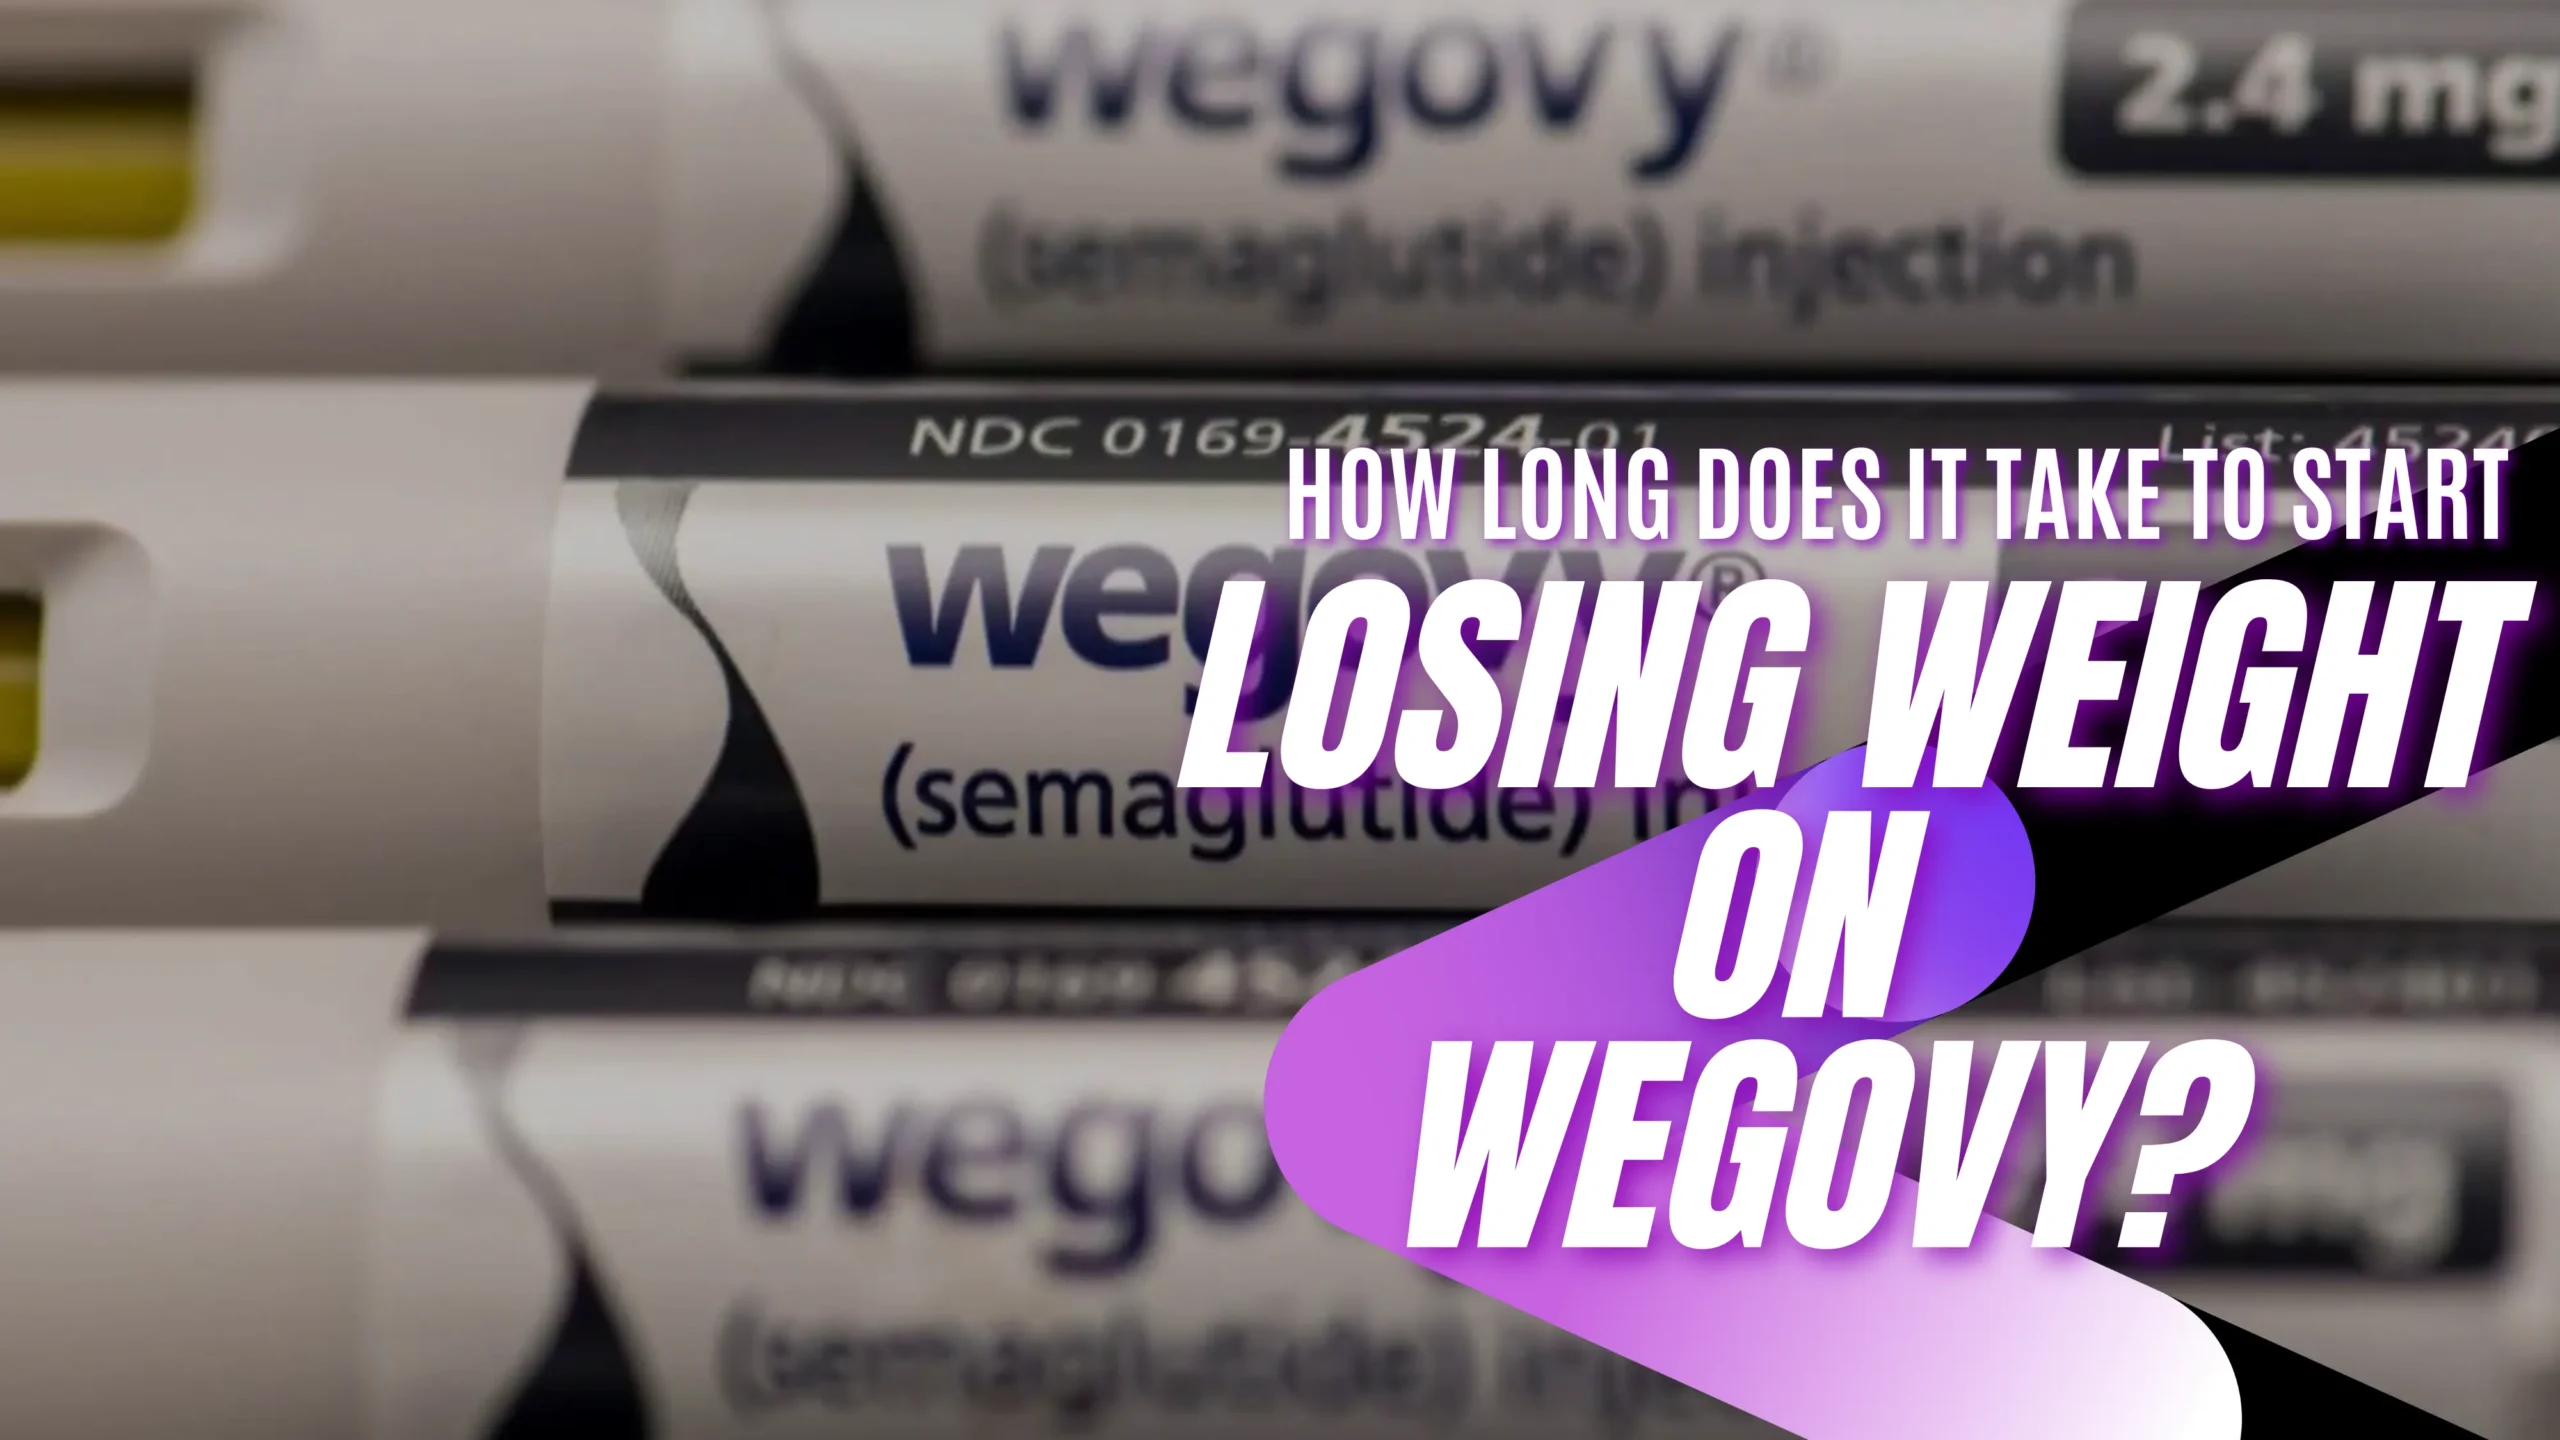 How long does it take to start losing weight on Wegovy